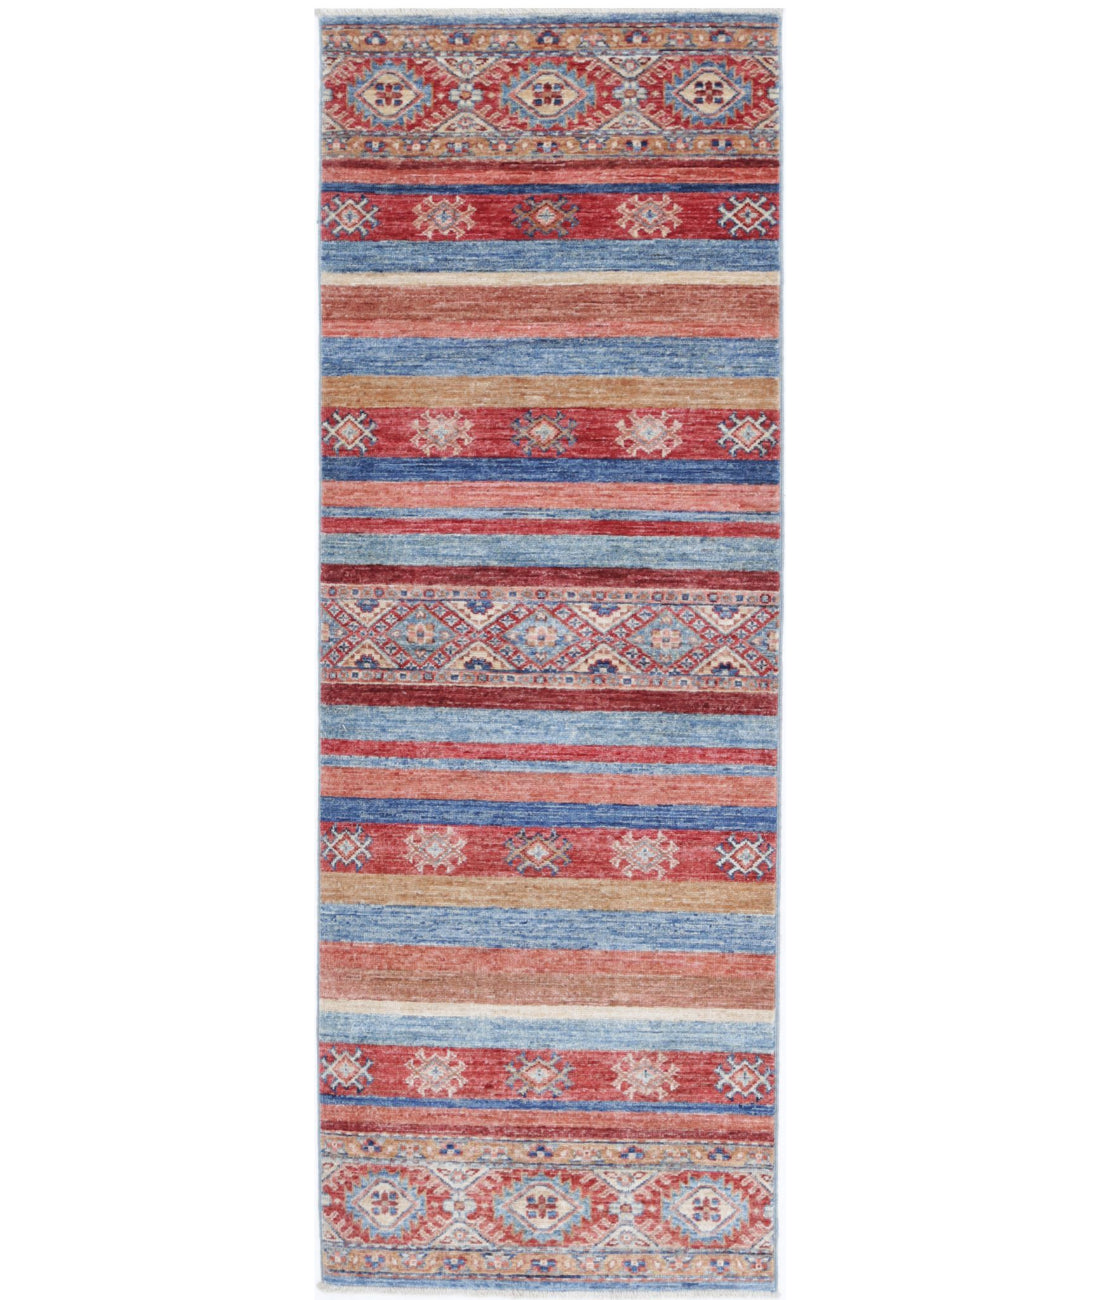 Hand Knotted Khurjeen Wool Rug - 1&#39;11&#39;&#39; x 5&#39;10&#39;&#39; 1&#39;11&#39;&#39; x 5&#39;10&#39;&#39; (58 X 175) / Multi / Multi